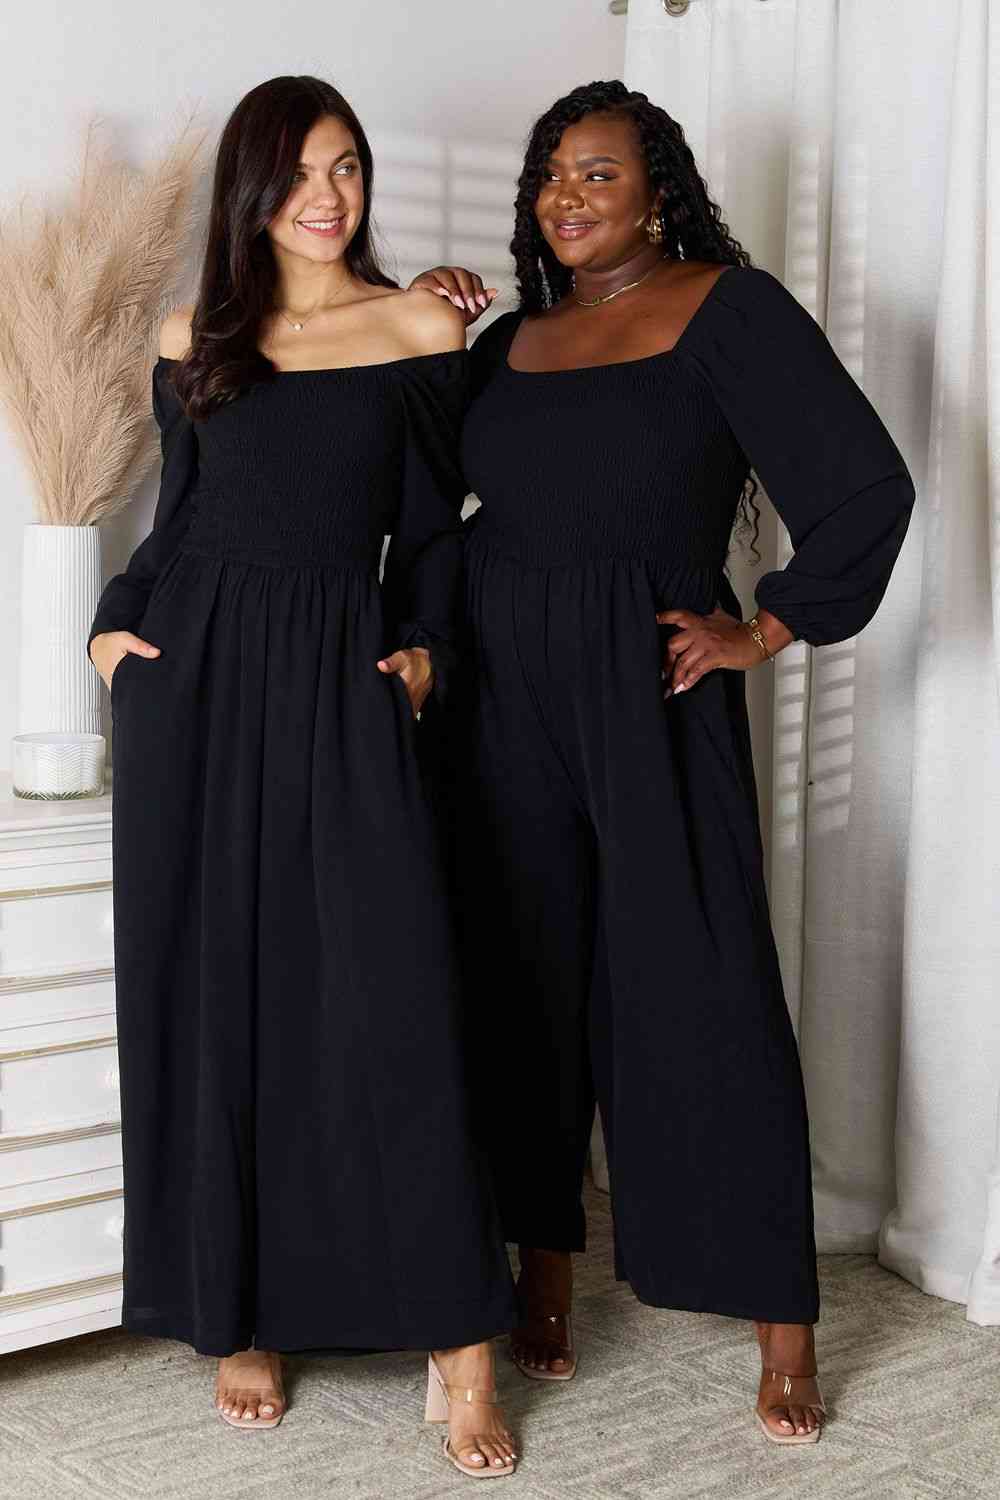 Women's Smocked Long Sleeve Wide Leg Jumpsuit with Pockets | Jumpsuits | Ro + Ivy